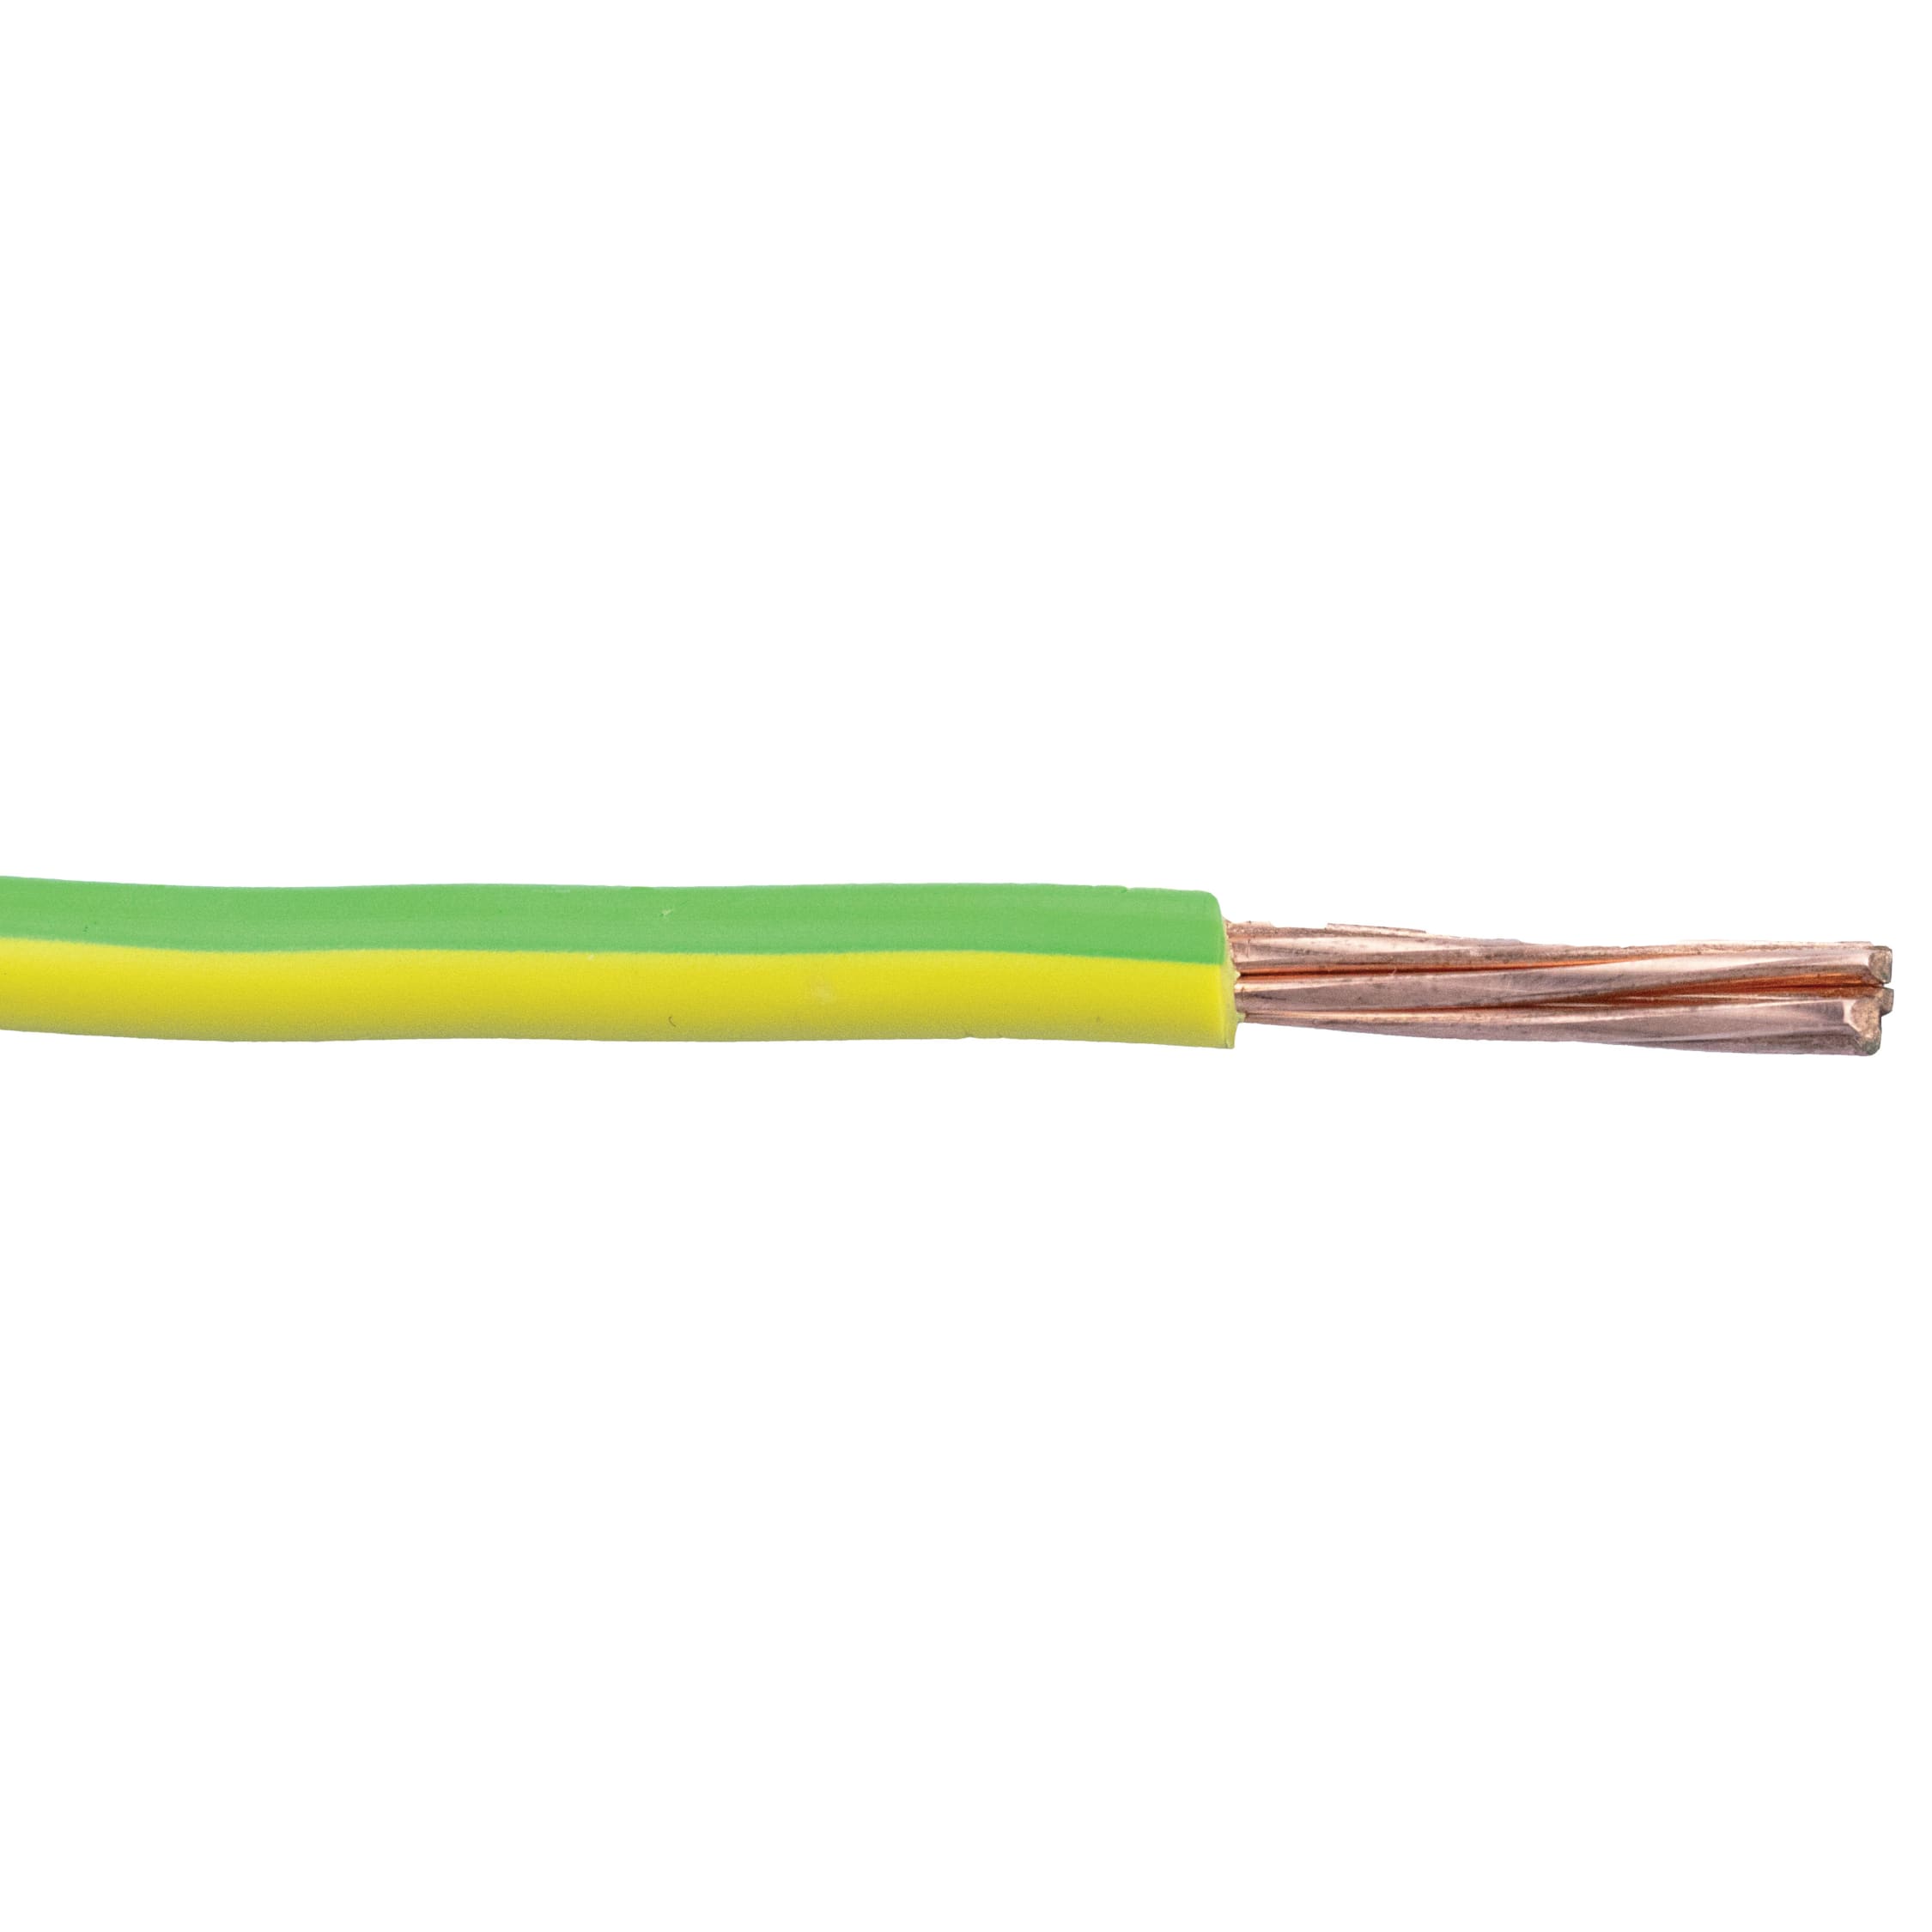 10mm Earth Bonding Electrical Cable Wire Core Green Yellow BASEC Approved 6491X 